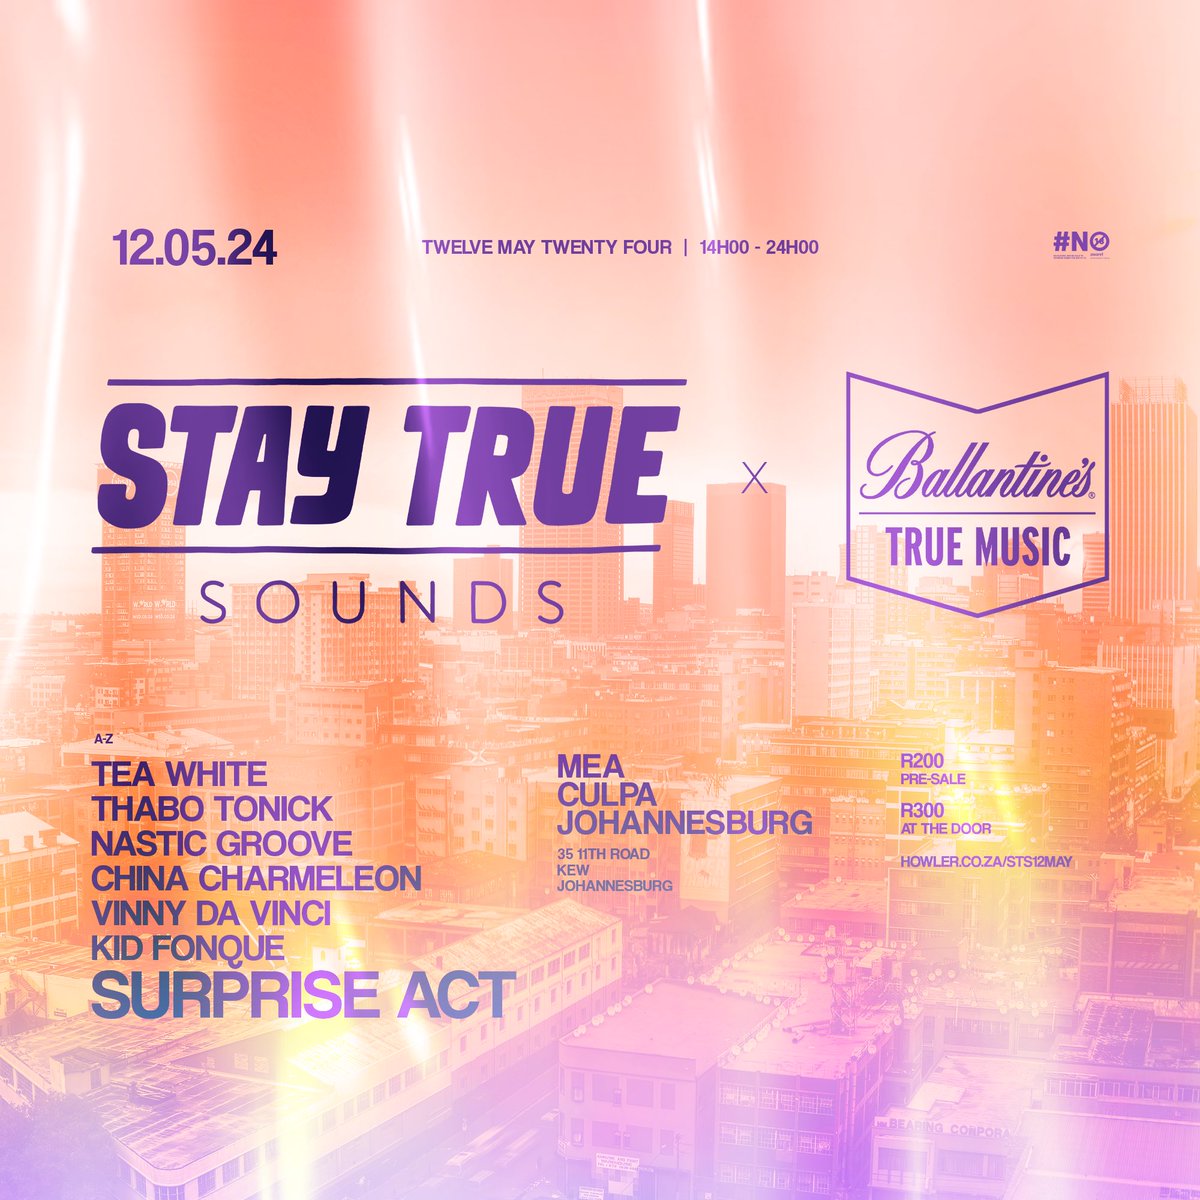 🌃Jozi, we’re teaming up with @BallantinesSA for our event at Mea Culpa, May 12 with @TeaWhite_10, @ThaboTonick_M @NasticGroove_SA, @CharmeleonChina, @VinnyDaVinci, @kidfonque & a surprise special guest🪄✨

🎫 howler.co.za/sts12may

 #staytrue #deephouse #staytruesounds